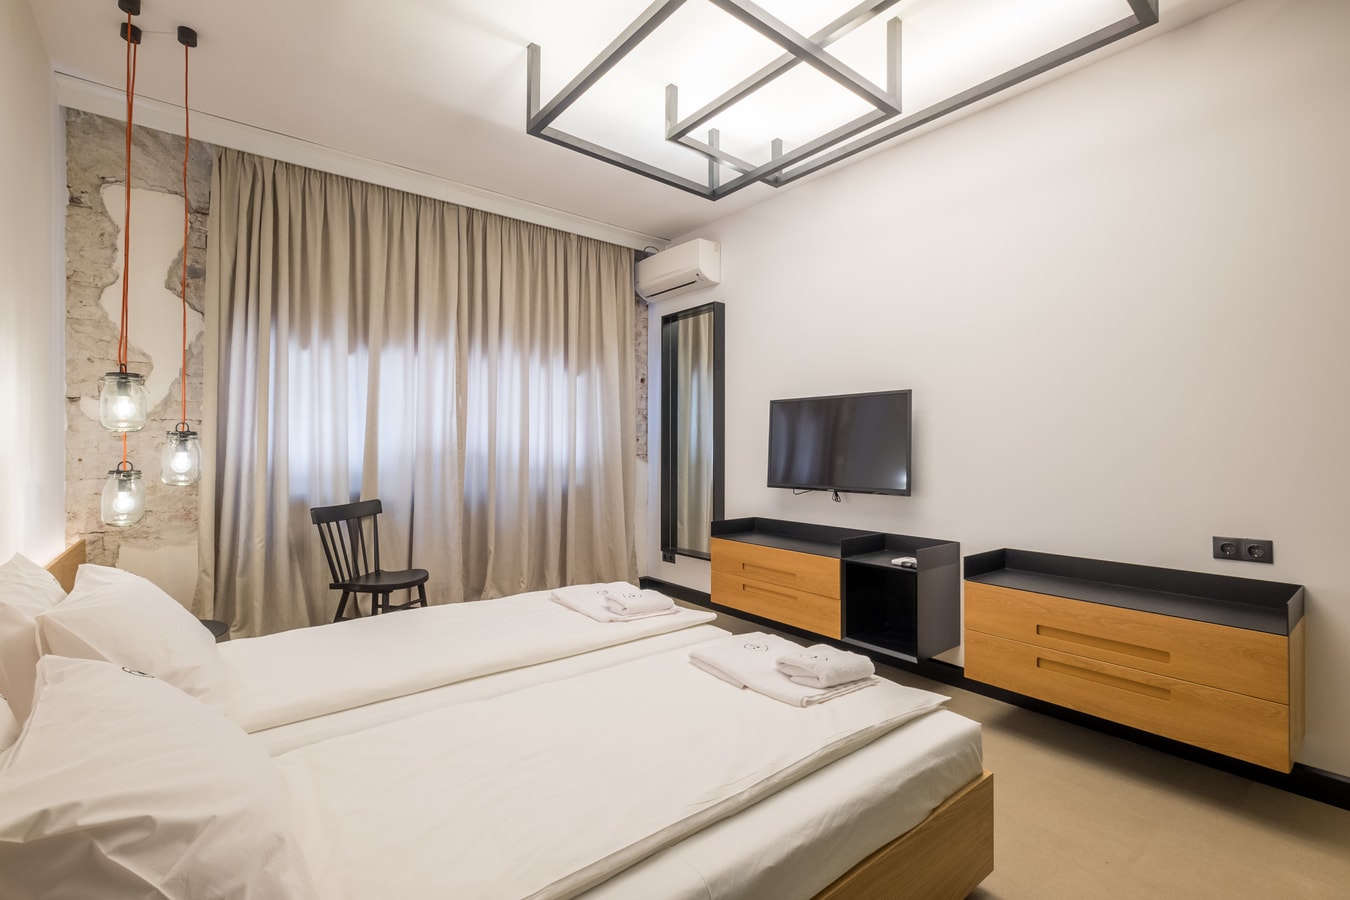 R34 Boutique Hotel - Deluxe Double Room №9 Flataway